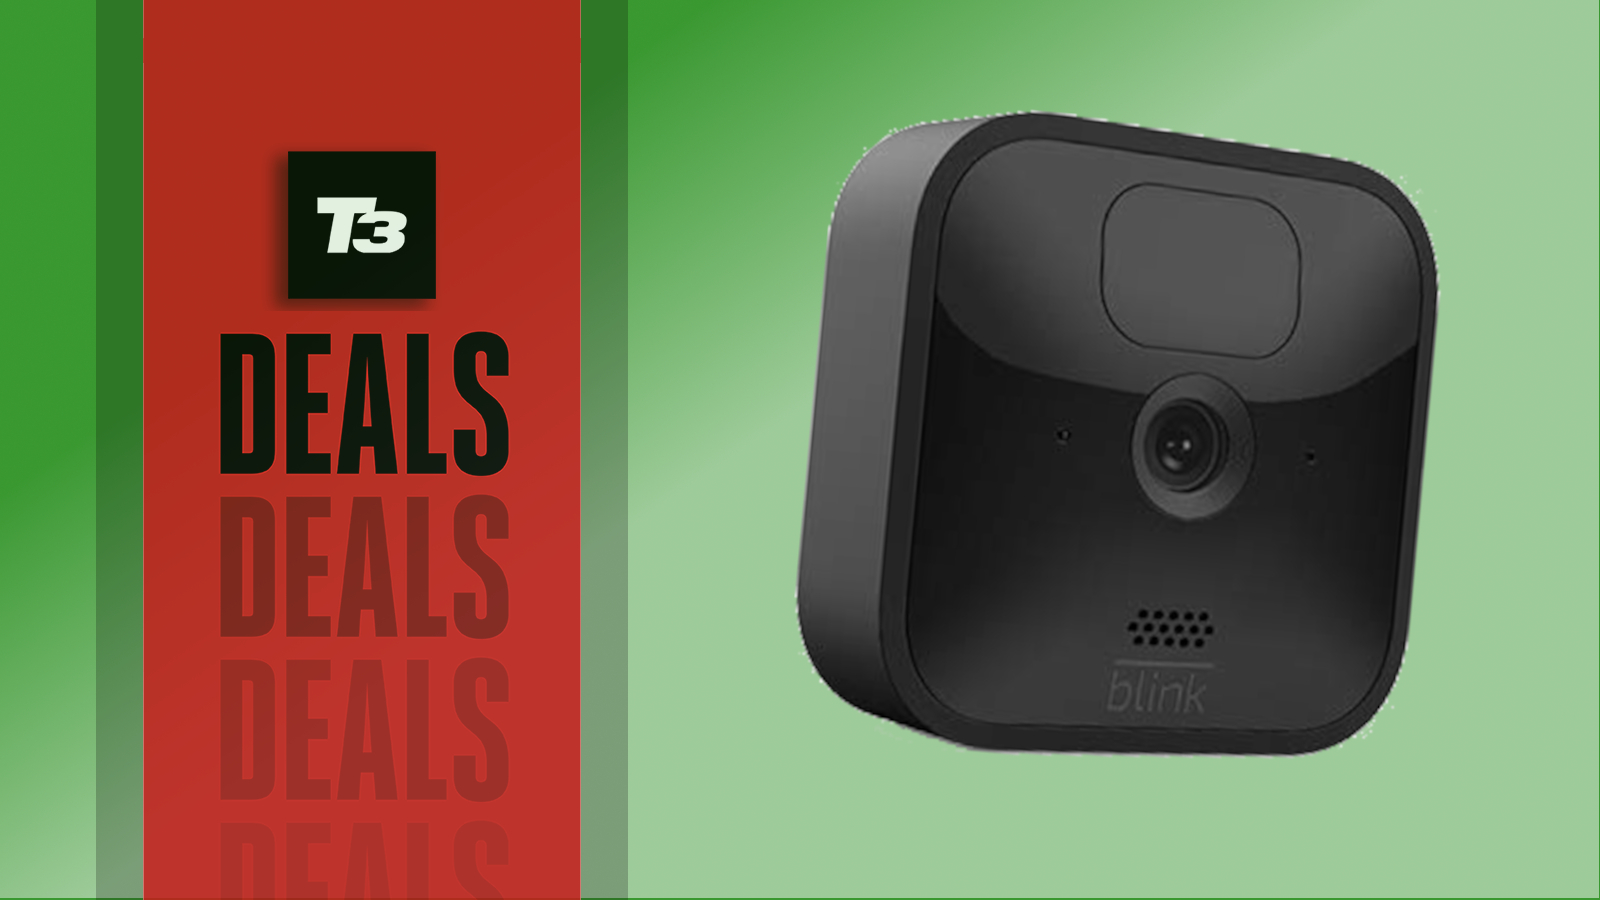 Improve your home security with 60% off the Blink Outdoor camera